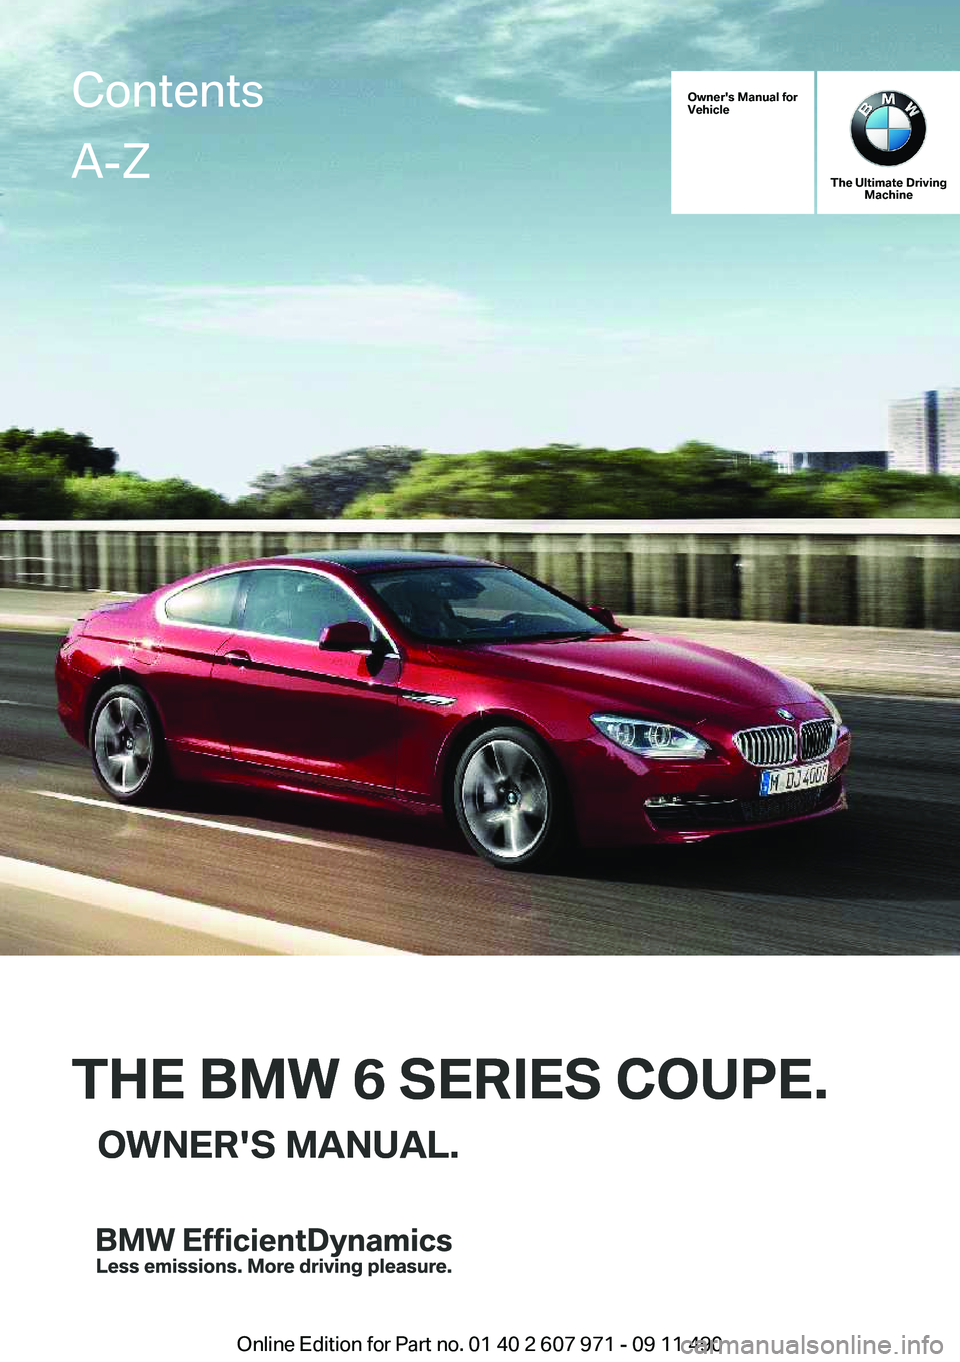 BMW 650I COUPE 2012  Owners Manual Owner's Manual for
Vehicle
THE BMW 6 SERIES COUPE.OWNER'S MANUAL.
The Ultimate Driving Machine
THE BMW 6 SERIES COUPE.OWNER'S MANUAL.
ContentsA-Z
Online Edition for Part no. 01 40 2 607 97